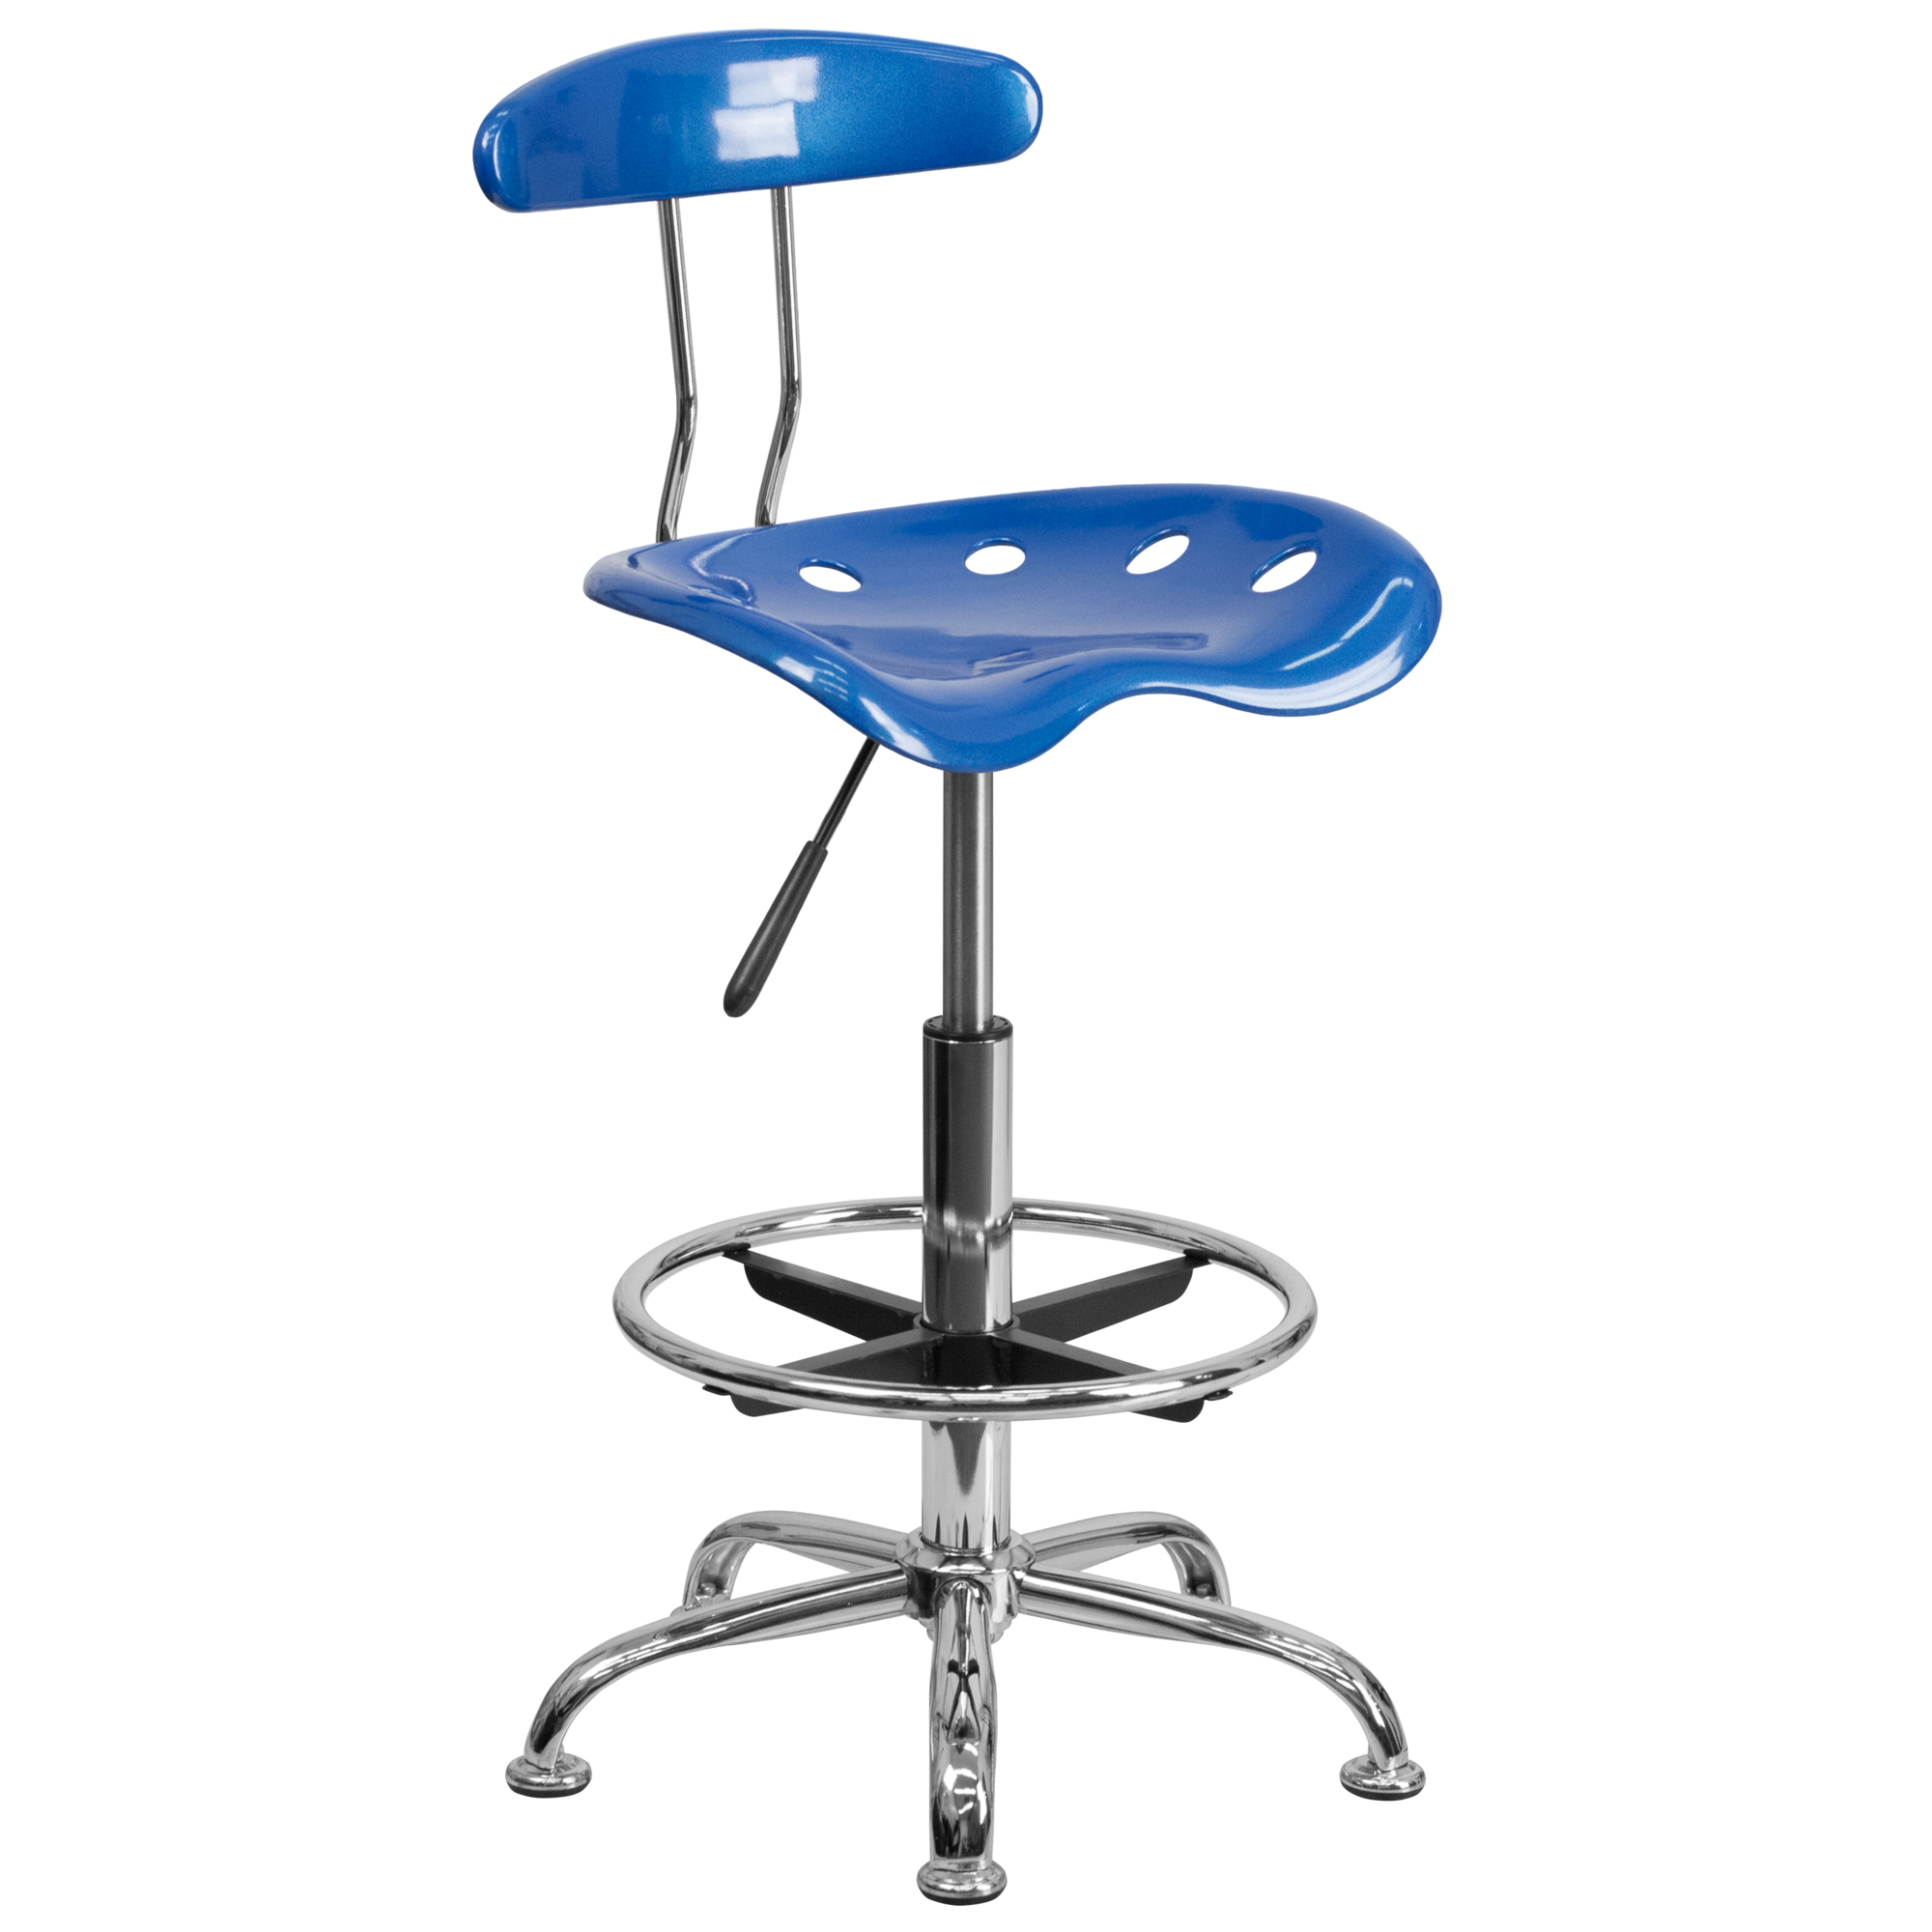 Flash Furniture, Vibrant Bright Blue and Chrome Drafting Stool, Primary Color Blue, Included (qty.) 1, Model LF215BRIBLU